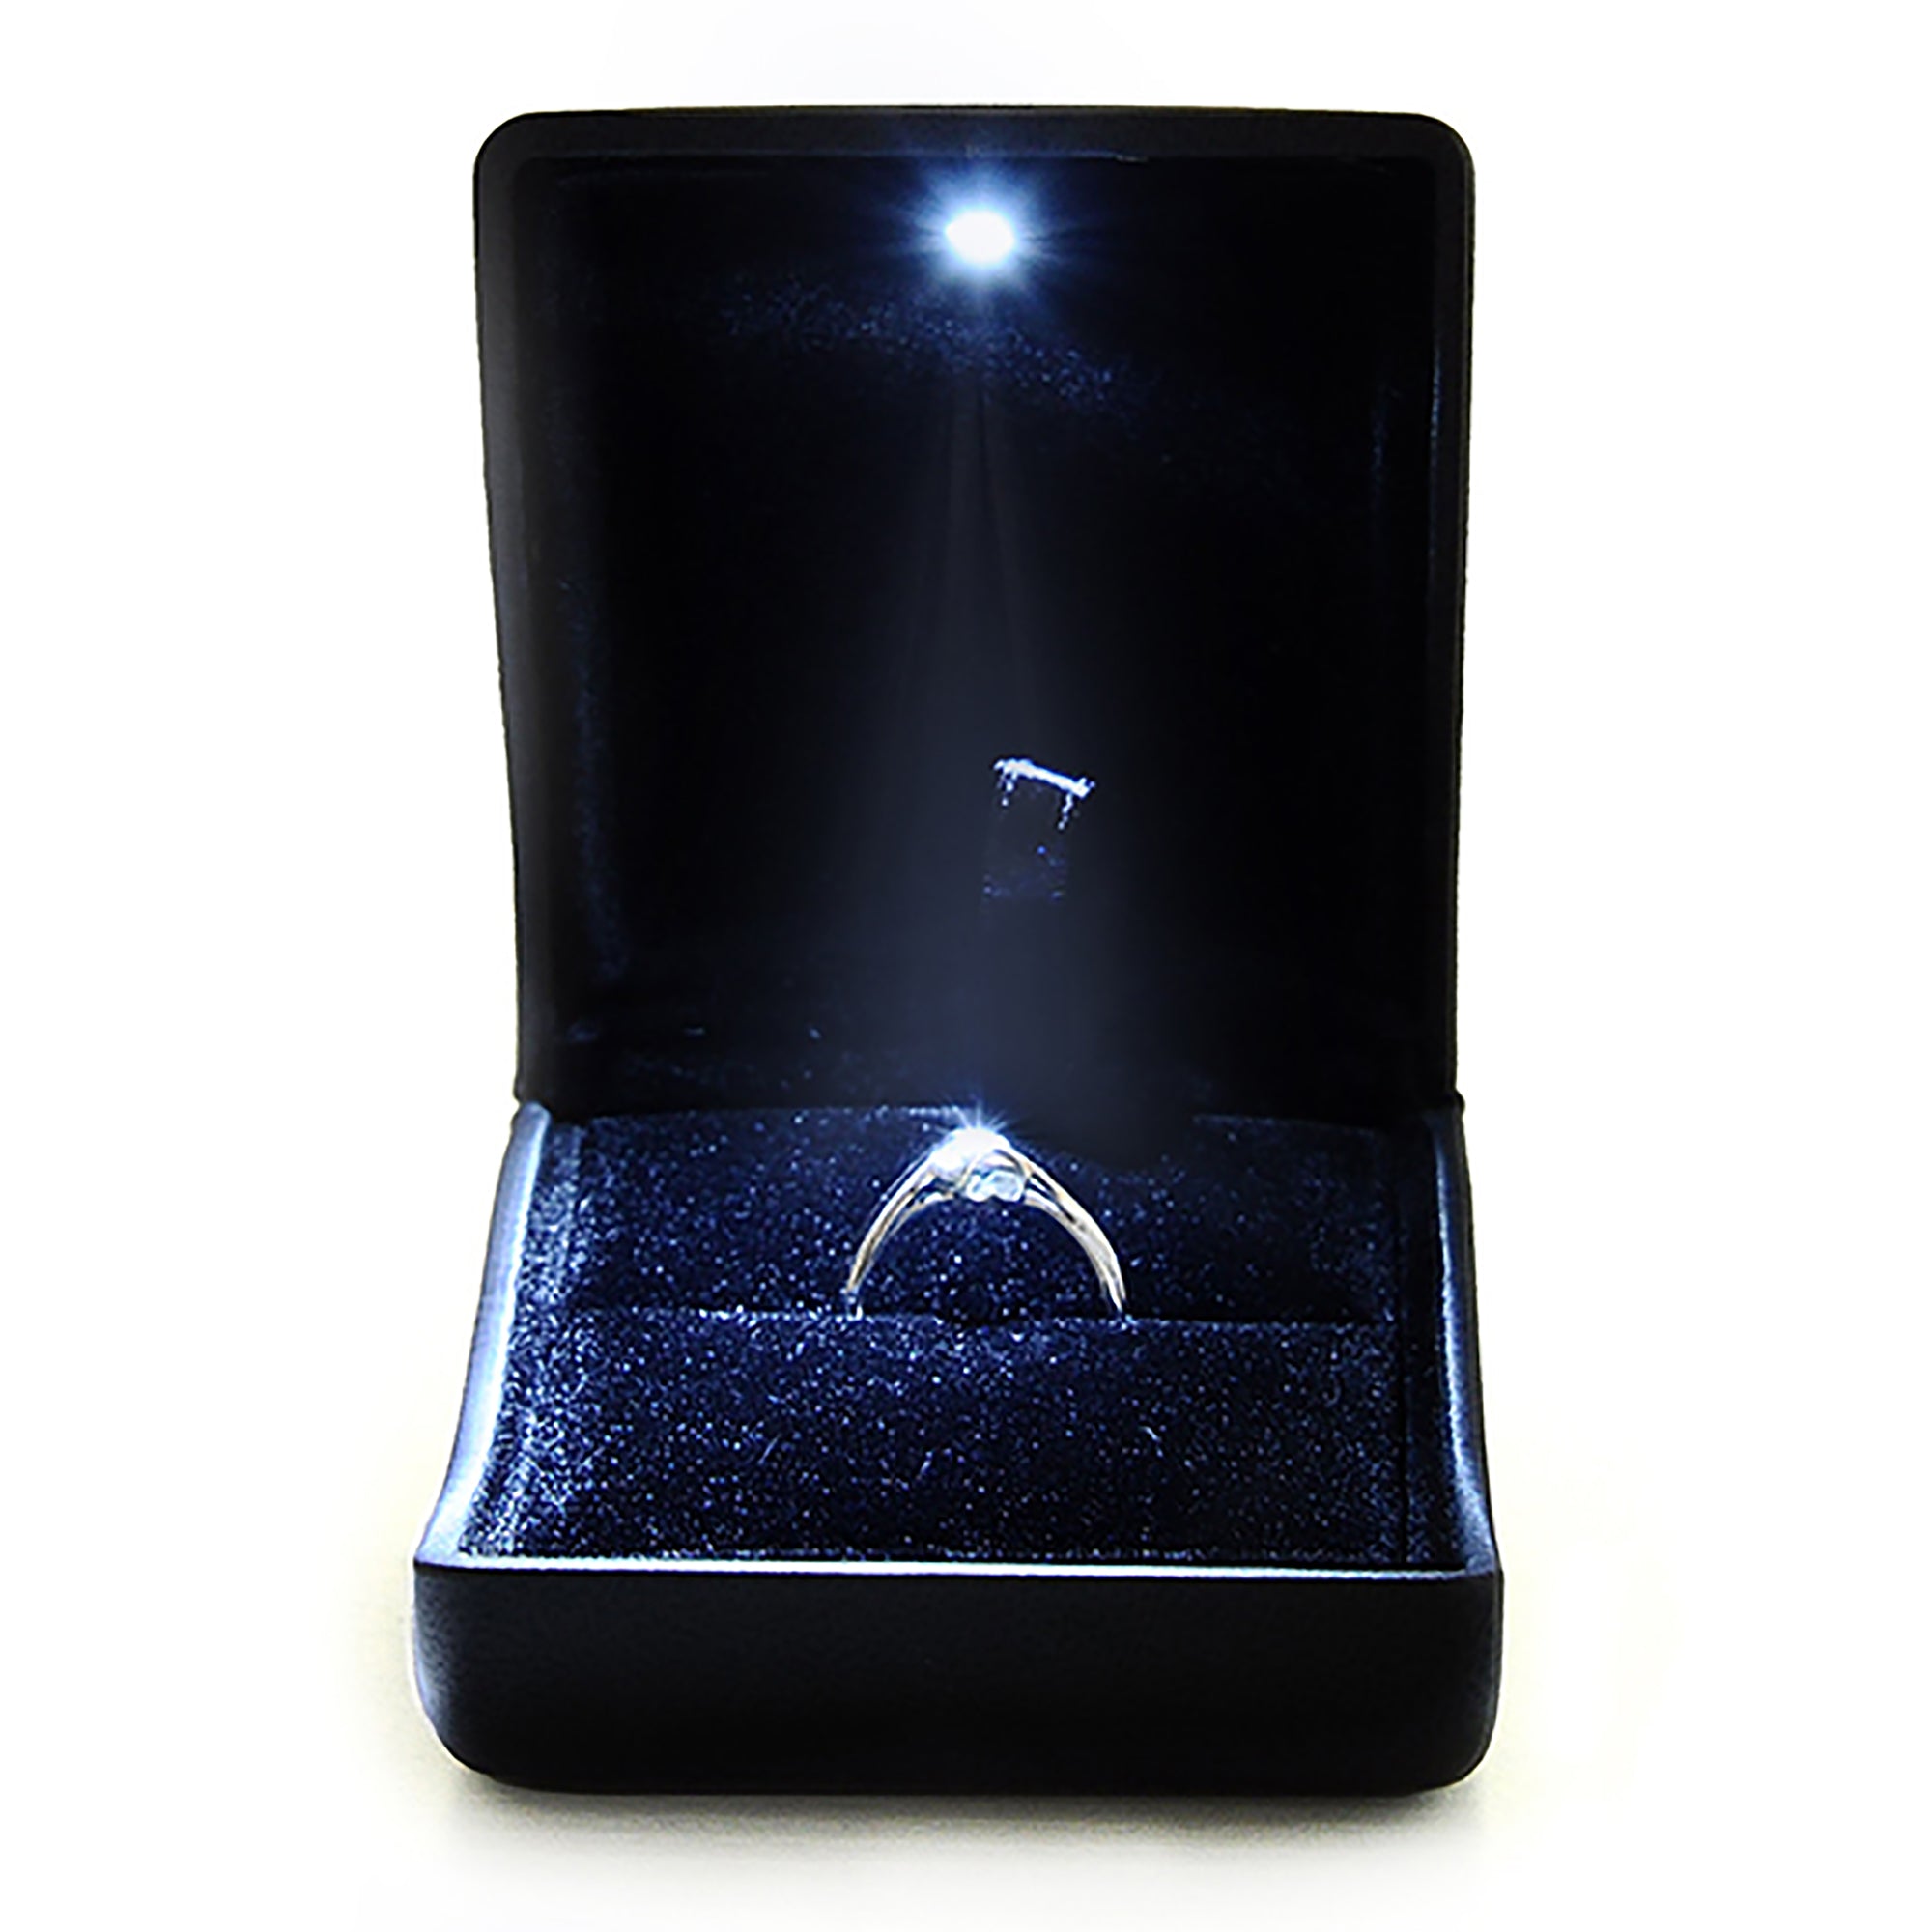 RING - LED Light Black Jewelry Box / Gift Box Vintage Gift Home Deco Decoration Design Valentines Gift Wedding Party